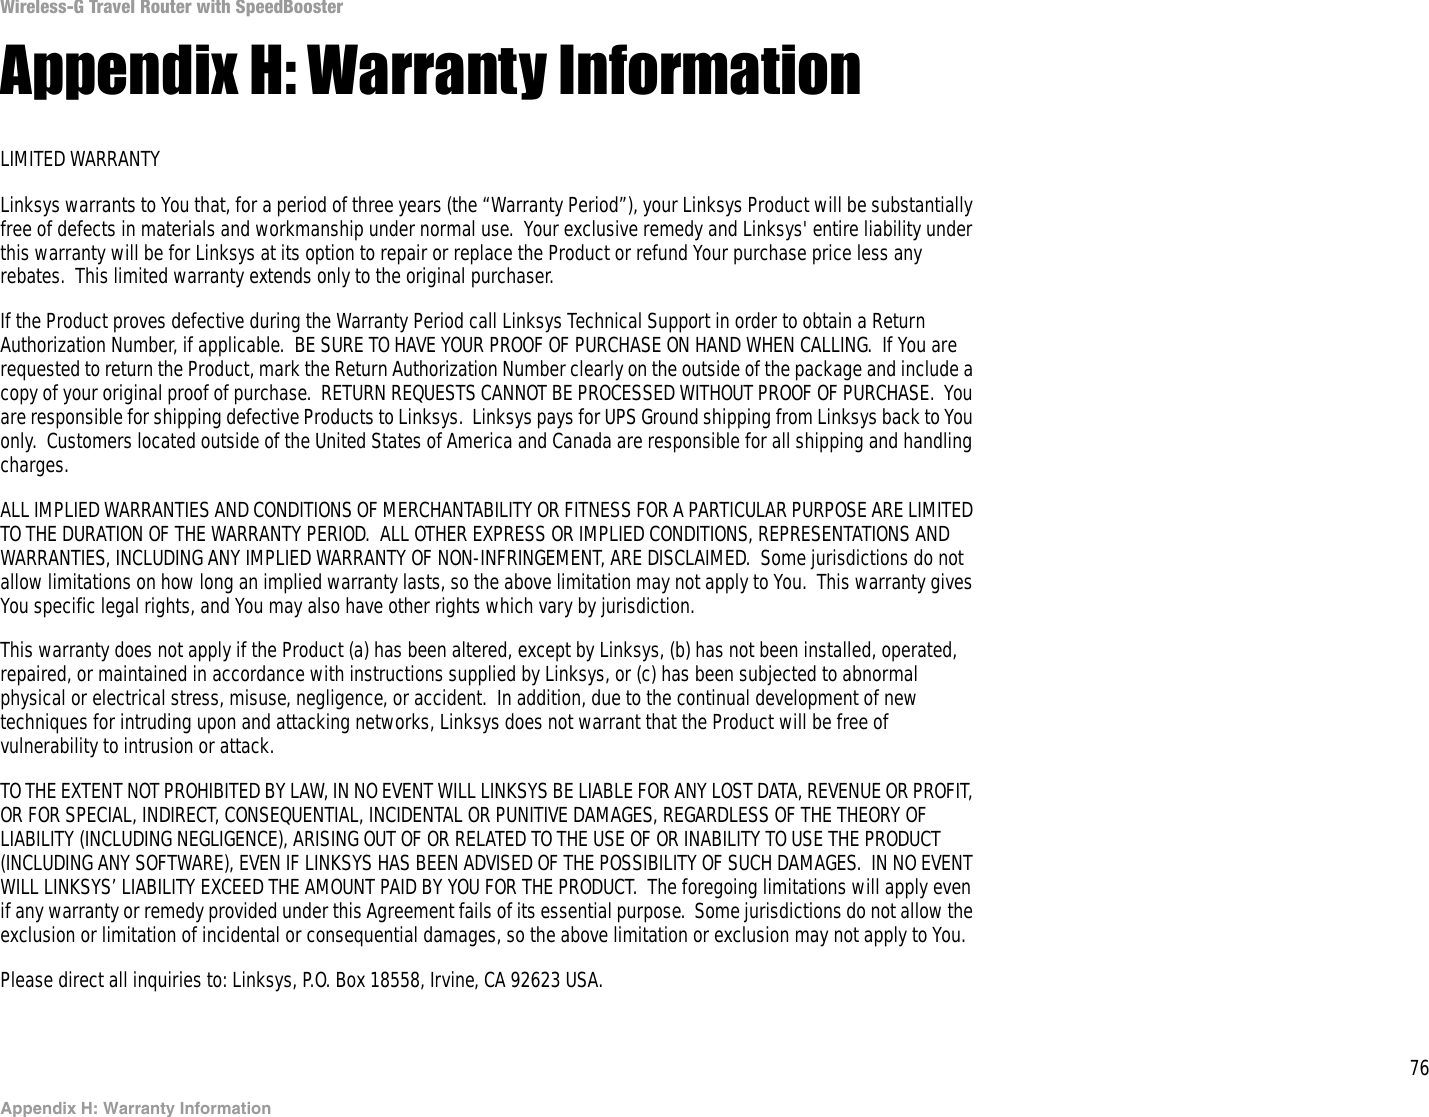 76Appendix H: Warranty InformationWireless-G Travel Router with SpeedBoosterAppendix H: Warranty InformationLIMITED WARRANTYLinksys warrants to You that, for a period of three years (the “Warranty Period”), your Linksys Product will be substantially free of defects in materials and workmanship under normal use.  Your exclusive remedy and Linksys&apos; entire liability under this warranty will be for Linksys at its option to repair or replace the Product or refund Your purchase price less any rebates.  This limited warranty extends only to the original purchaser.  If the Product proves defective during the Warranty Period call Linksys Technical Support in order to obtain a Return Authorization Number, if applicable.  BE SURE TO HAVE YOUR PROOF OF PURCHASE ON HAND WHEN CALLING.  If You are requested to return the Product, mark the Return Authorization Number clearly on the outside of the package and include a copy of your original proof of purchase.  RETURN REQUESTS CANNOT BE PROCESSED WITHOUT PROOF OF PURCHASE.  You are responsible for shipping defective Products to Linksys.  Linksys pays for UPS Ground shipping from Linksys back to You only.  Customers located outside of the United States of America and Canada are responsible for all shipping and handling charges. ALL IMPLIED WARRANTIES AND CONDITIONS OF MERCHANTABILITY OR FITNESS FOR A PARTICULAR PURPOSE ARE LIMITED TO THE DURATION OF THE WARRANTY PERIOD.  ALL OTHER EXPRESS OR IMPLIED CONDITIONS, REPRESENTATIONS AND WARRANTIES, INCLUDING ANY IMPLIED WARRANTY OF NON-INFRINGEMENT, ARE DISCLAIMED.  Some jurisdictions do not allow limitations on how long an implied warranty lasts, so the above limitation may not apply to You.  This warranty gives You specific legal rights, and You may also have other rights which vary by jurisdiction.This warranty does not apply if the Product (a) has been altered, except by Linksys, (b) has not been installed, operated, repaired, or maintained in accordance with instructions supplied by Linksys, or (c) has been subjected to abnormal physical or electrical stress, misuse, negligence, or accident.  In addition, due to the continual development of new techniques for intruding upon and attacking networks, Linksys does not warrant that the Product will be free of vulnerability to intrusion or attack.TO THE EXTENT NOT PROHIBITED BY LAW, IN NO EVENT WILL LINKSYS BE LIABLE FOR ANY LOST DATA, REVENUE OR PROFIT, OR FOR SPECIAL, INDIRECT, CONSEQUENTIAL, INCIDENTAL OR PUNITIVE DAMAGES, REGARDLESS OF THE THEORY OF LIABILITY (INCLUDING NEGLIGENCE), ARISING OUT OF OR RELATED TO THE USE OF OR INABILITY TO USE THE PRODUCT (INCLUDING ANY SOFTWARE), EVEN IF LINKSYS HAS BEEN ADVISED OF THE POSSIBILITY OF SUCH DAMAGES.  IN NO EVENT WILL LINKSYS’ LIABILITY EXCEED THE AMOUNT PAID BY YOU FOR THE PRODUCT.  The foregoing limitations will apply even if any warranty or remedy provided under this Agreement fails of its essential purpose.  Some jurisdictions do not allow the exclusion or limitation of incidental or consequential damages, so the above limitation or exclusion may not apply to You.Please direct all inquiries to: Linksys, P.O. Box 18558, Irvine, CA 92623 USA.